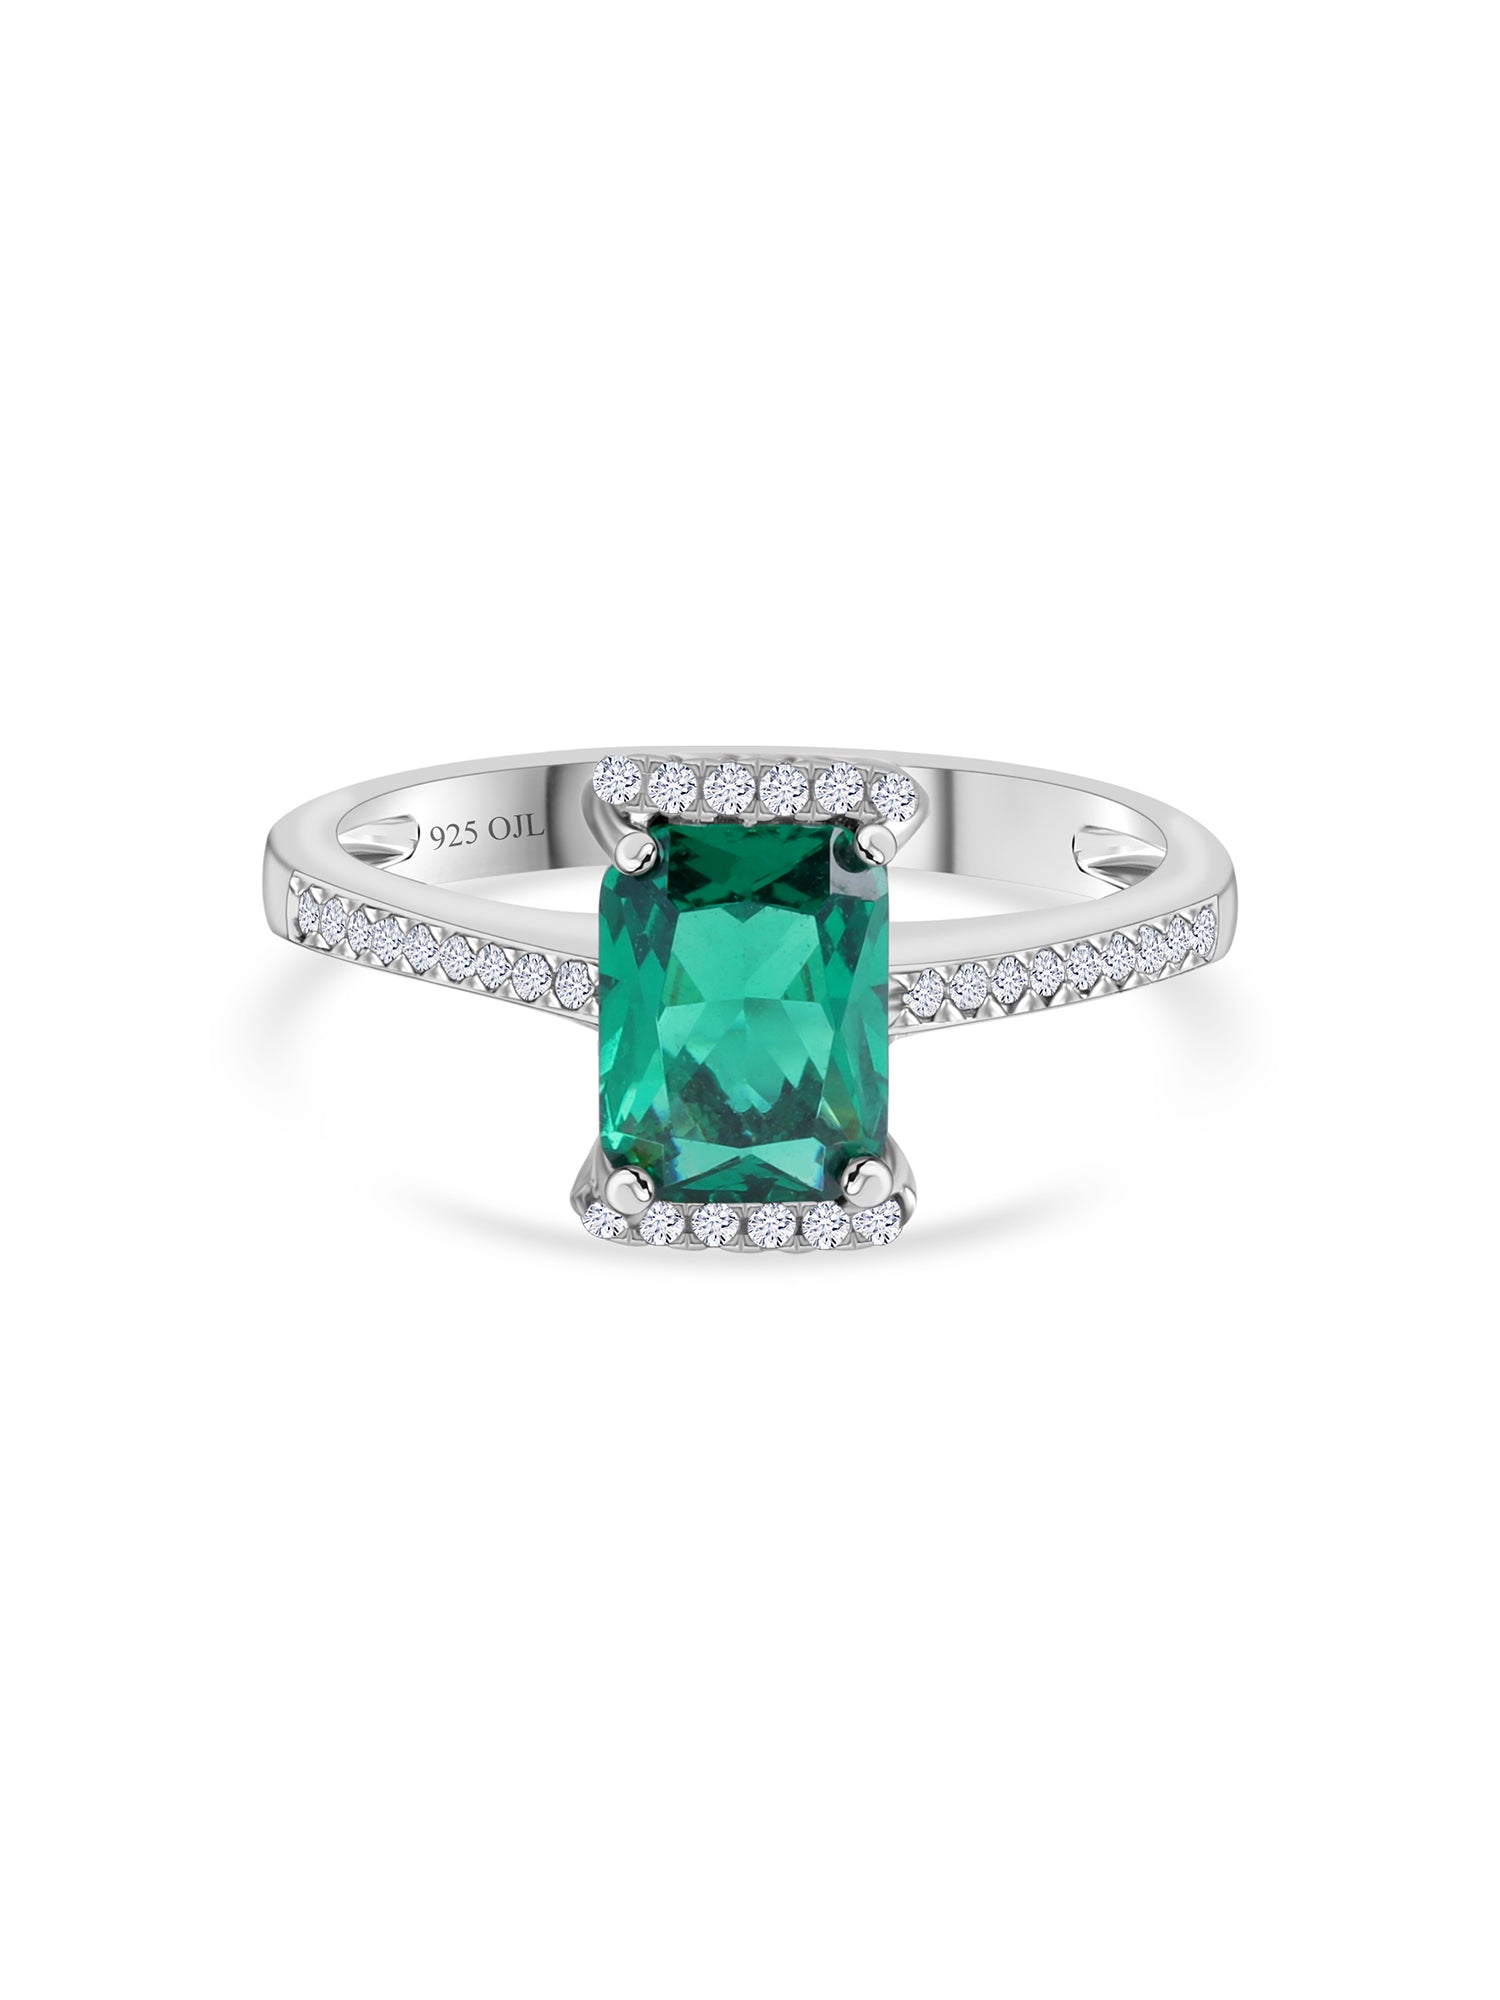 1.25 Carat Green Emerald Octagon Ring in Silver-1